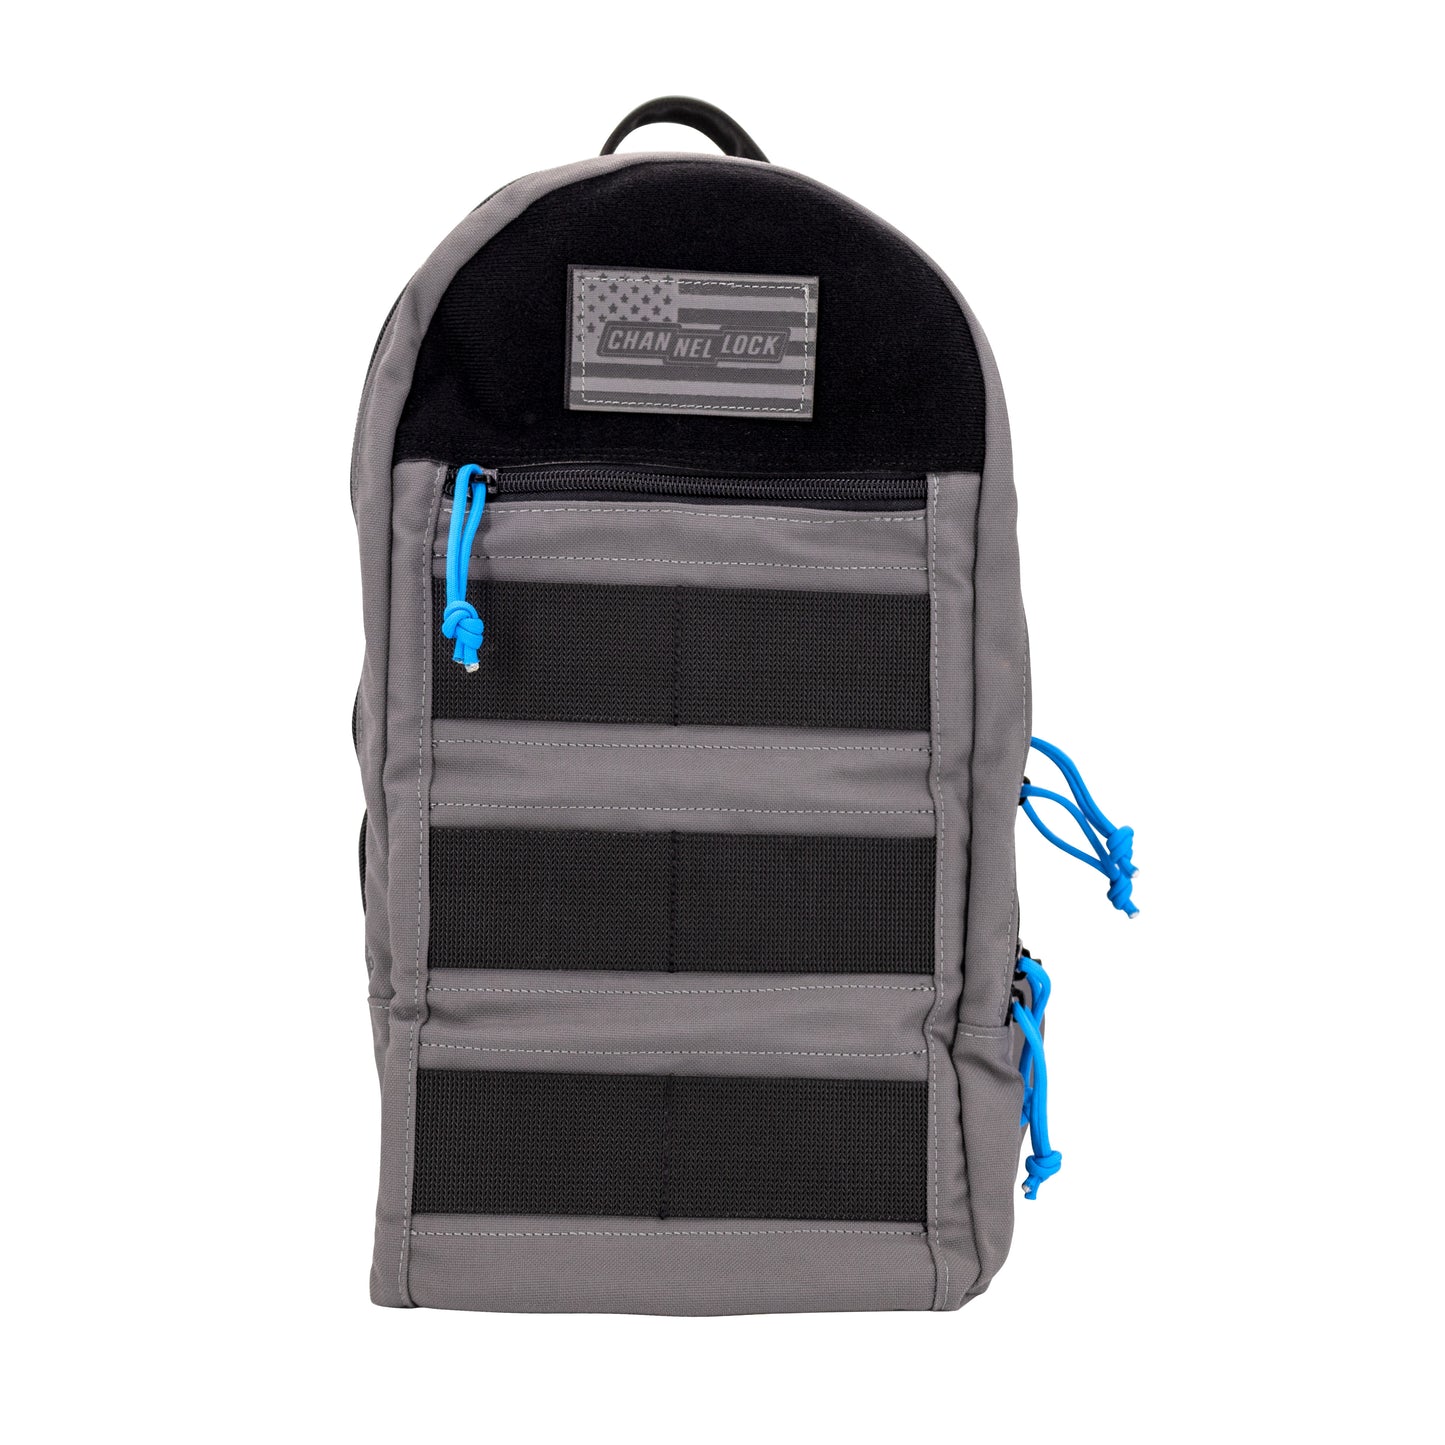 TBP2G CHANNELLOCK® PRO Double-Compartment Tool Backpack w/ Modular AIMS™ System